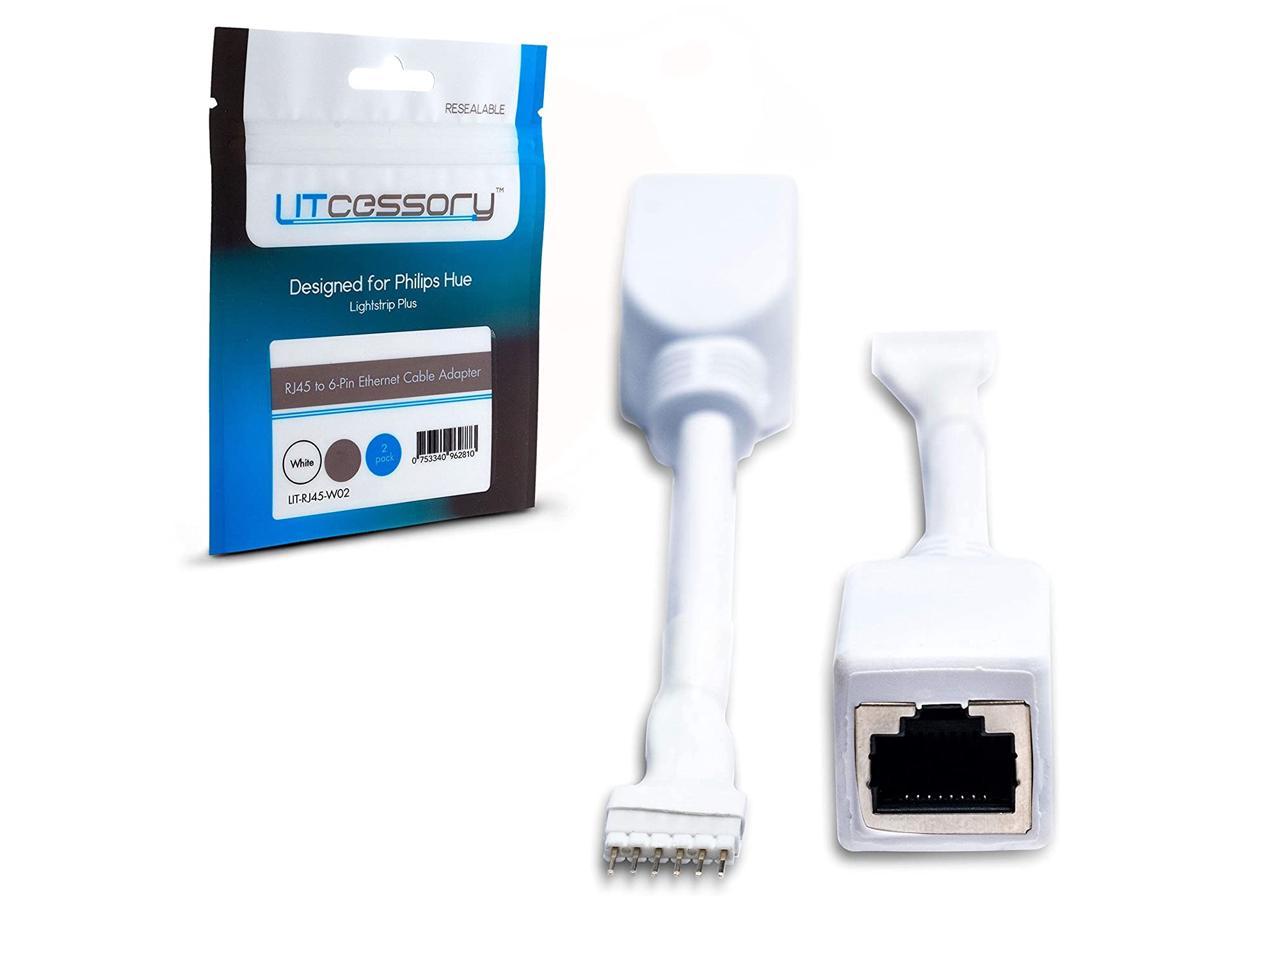 Black Litcessory Direct-to-Controller Adapter for Philips Hue Lightstrip Plus 